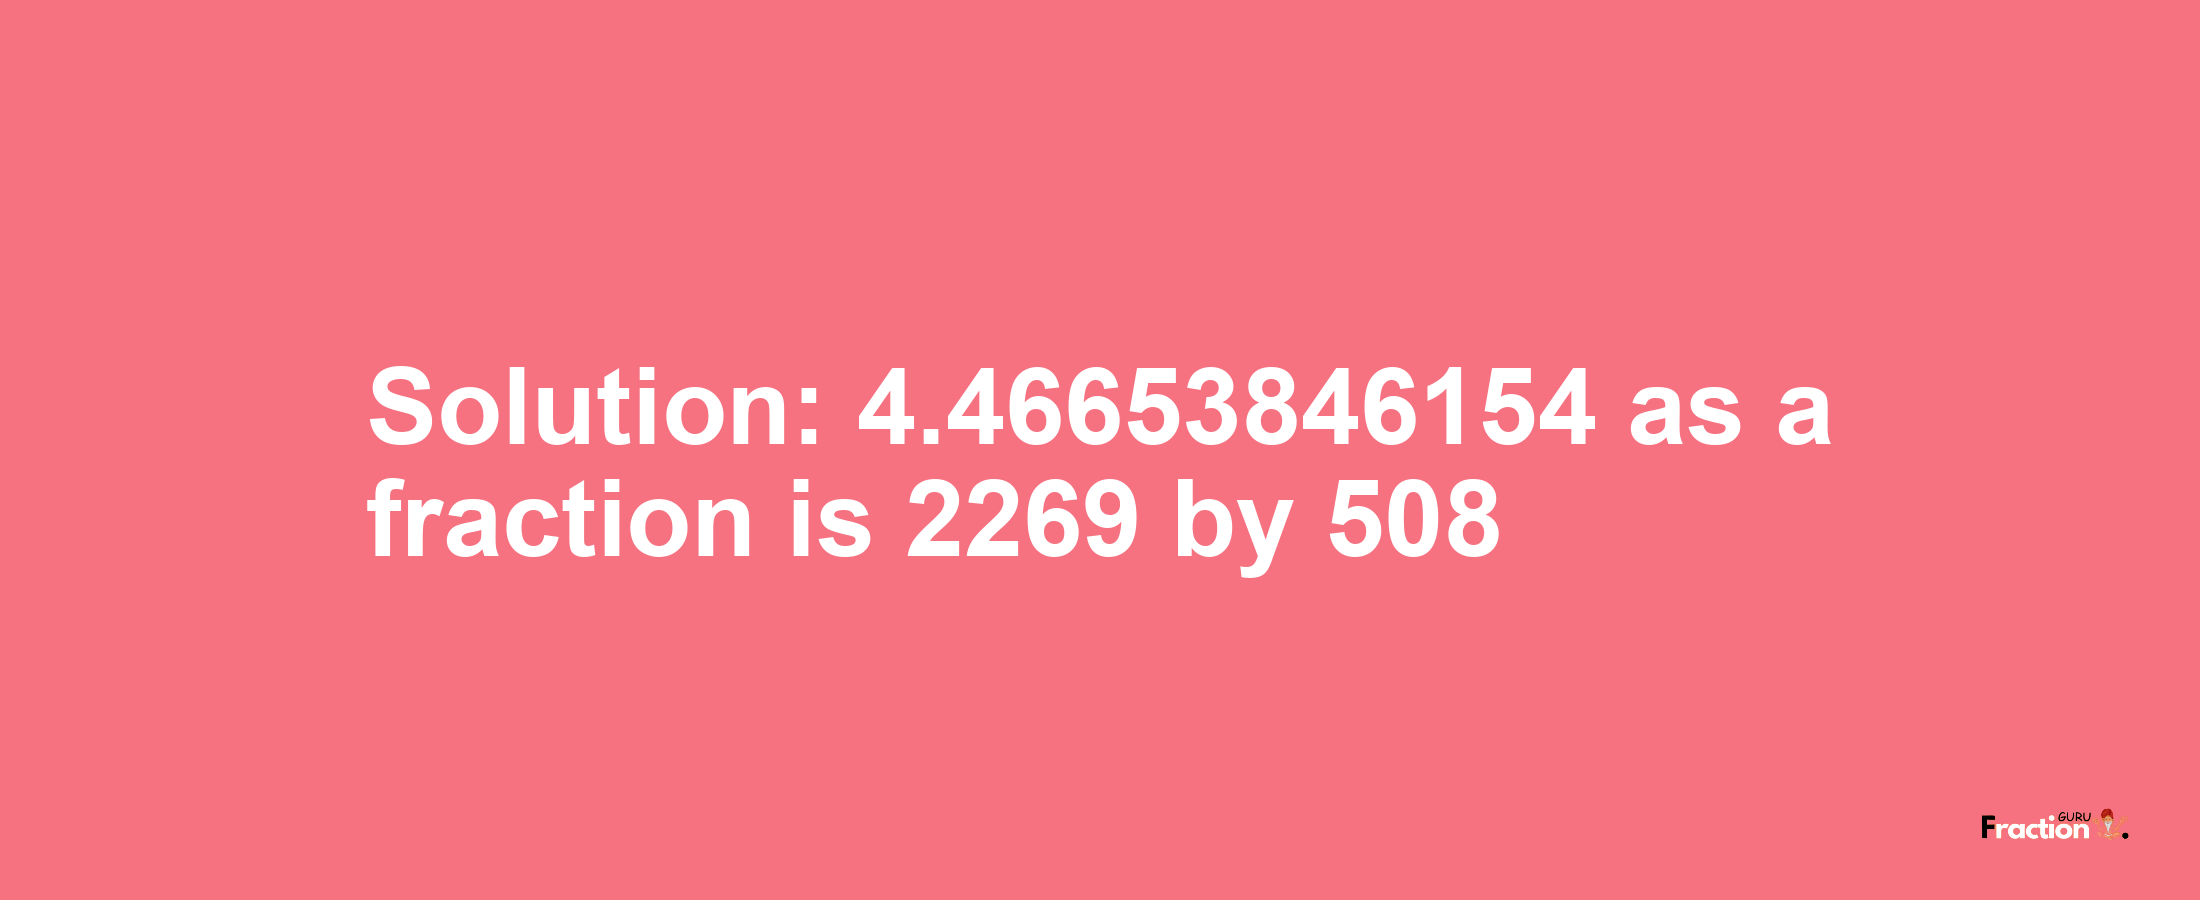 Solution:4.46653846154 as a fraction is 2269/508